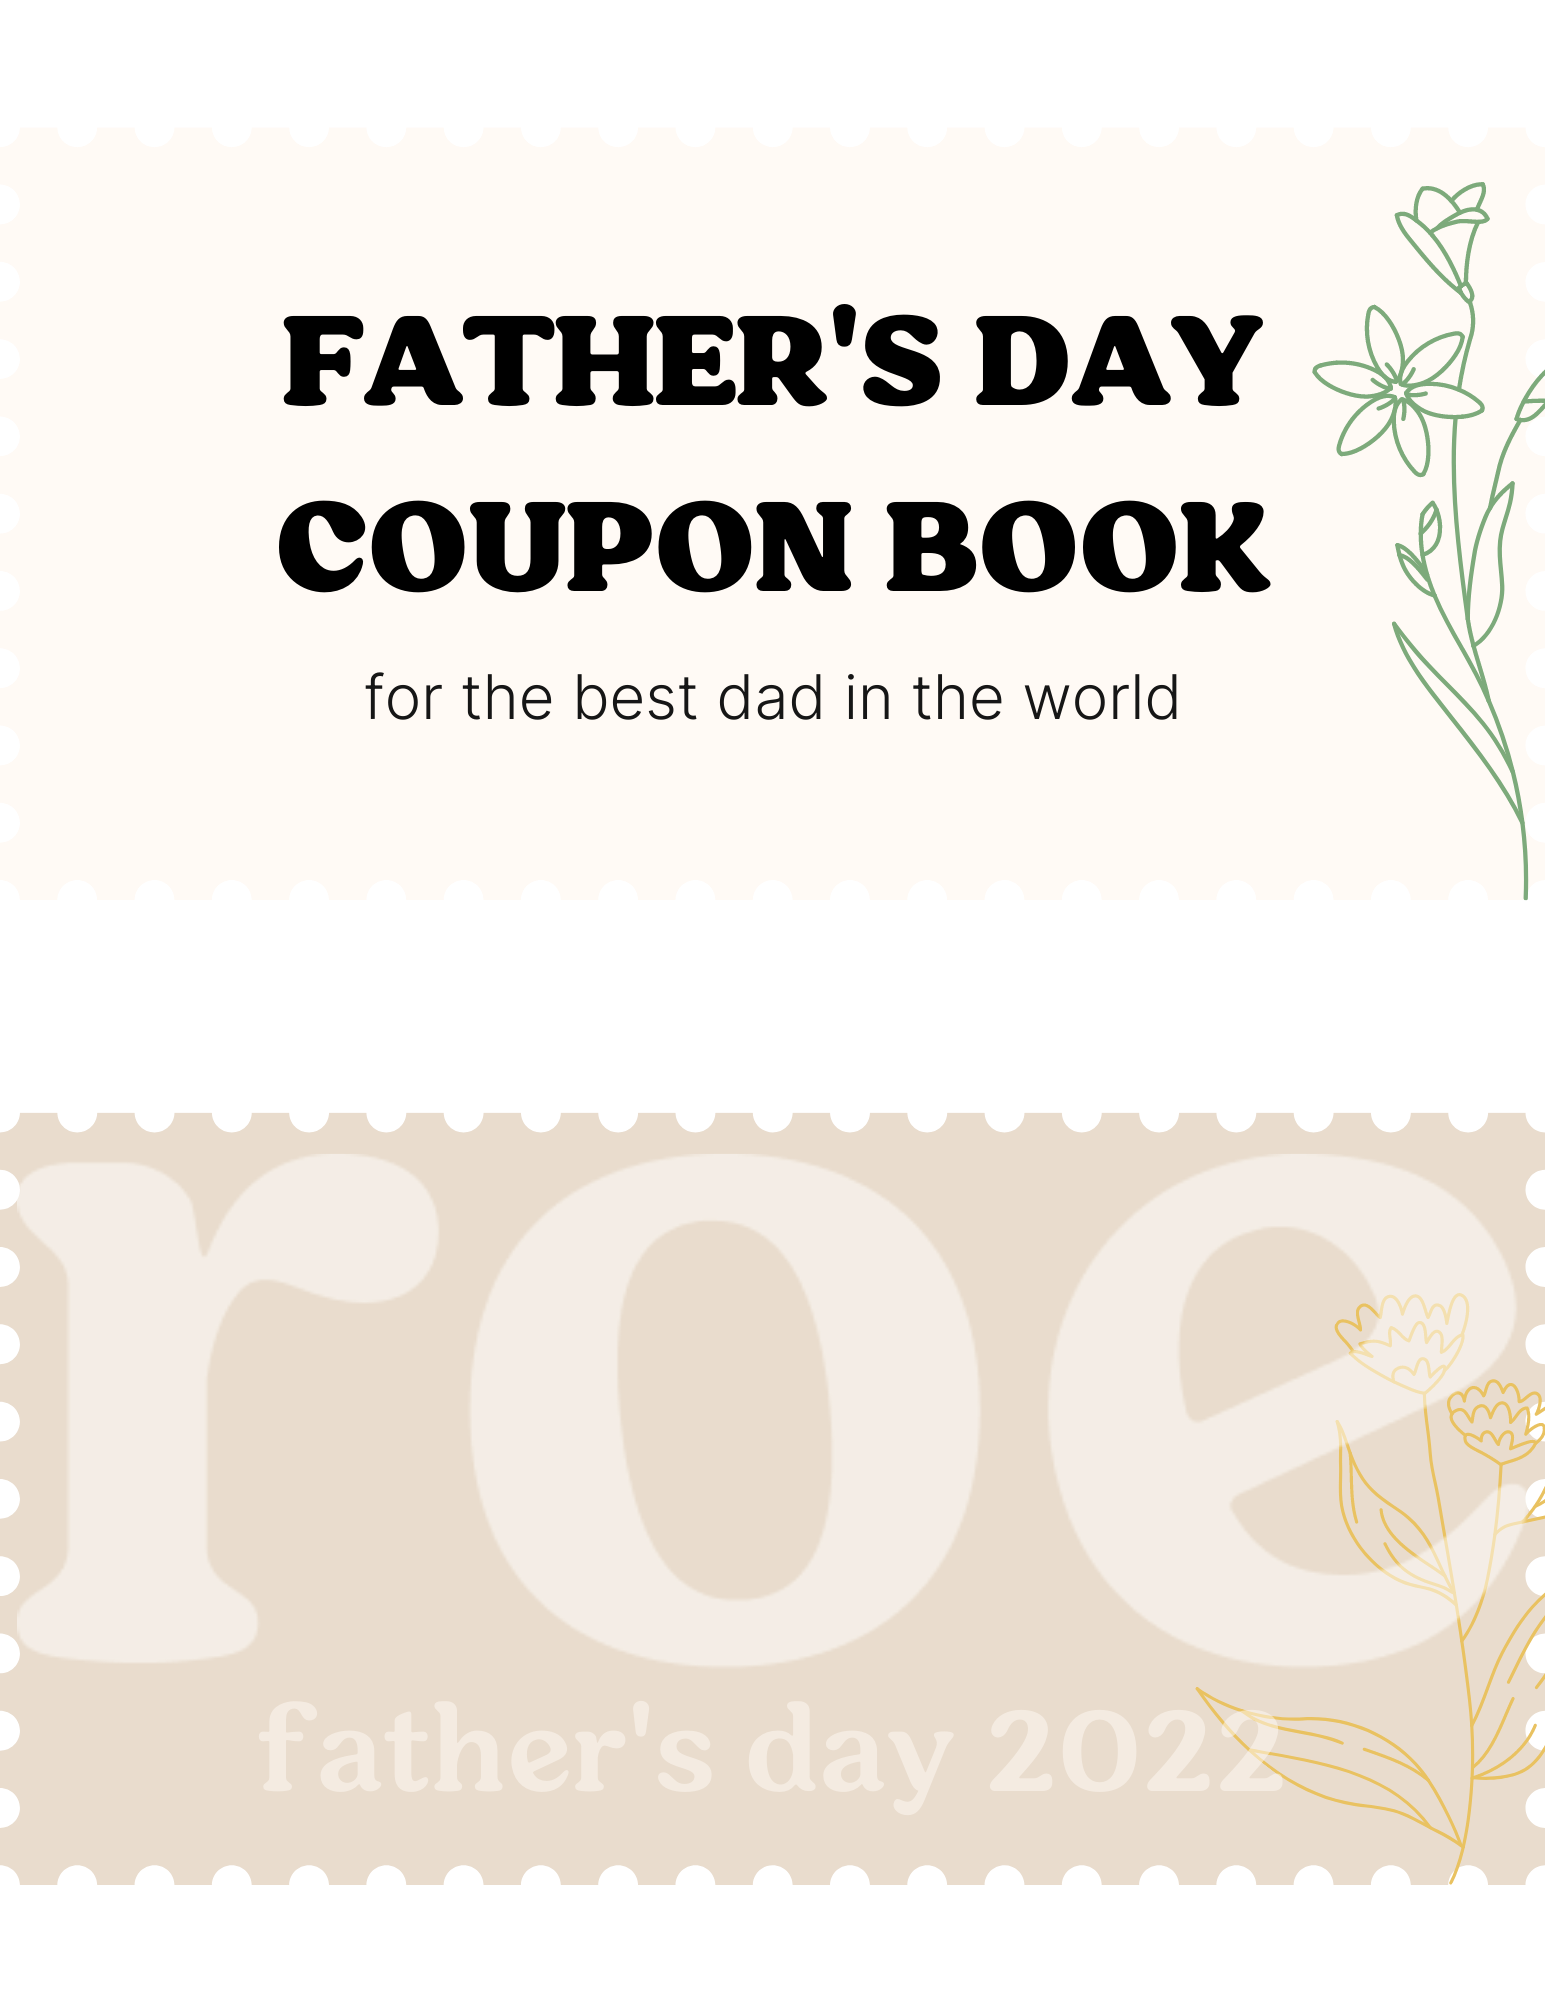 Free Father's Day gift ideas. Full coupon book for dad this fathers day 2022.